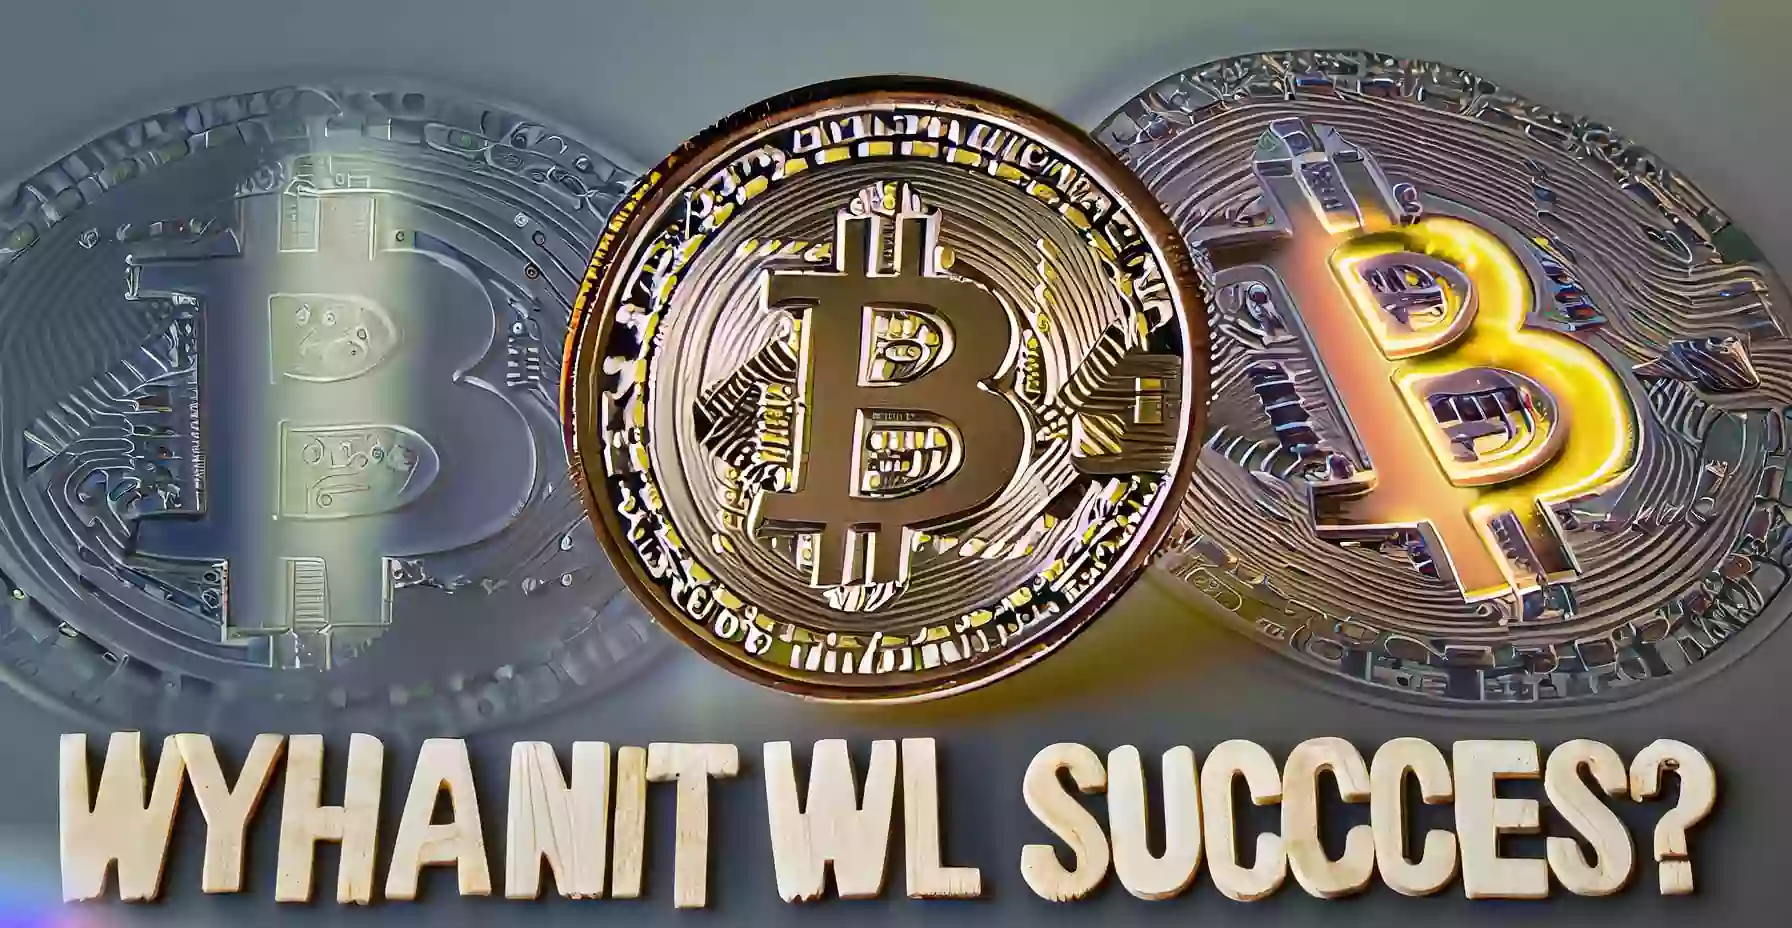 Why Bitcoin Will Succeed?